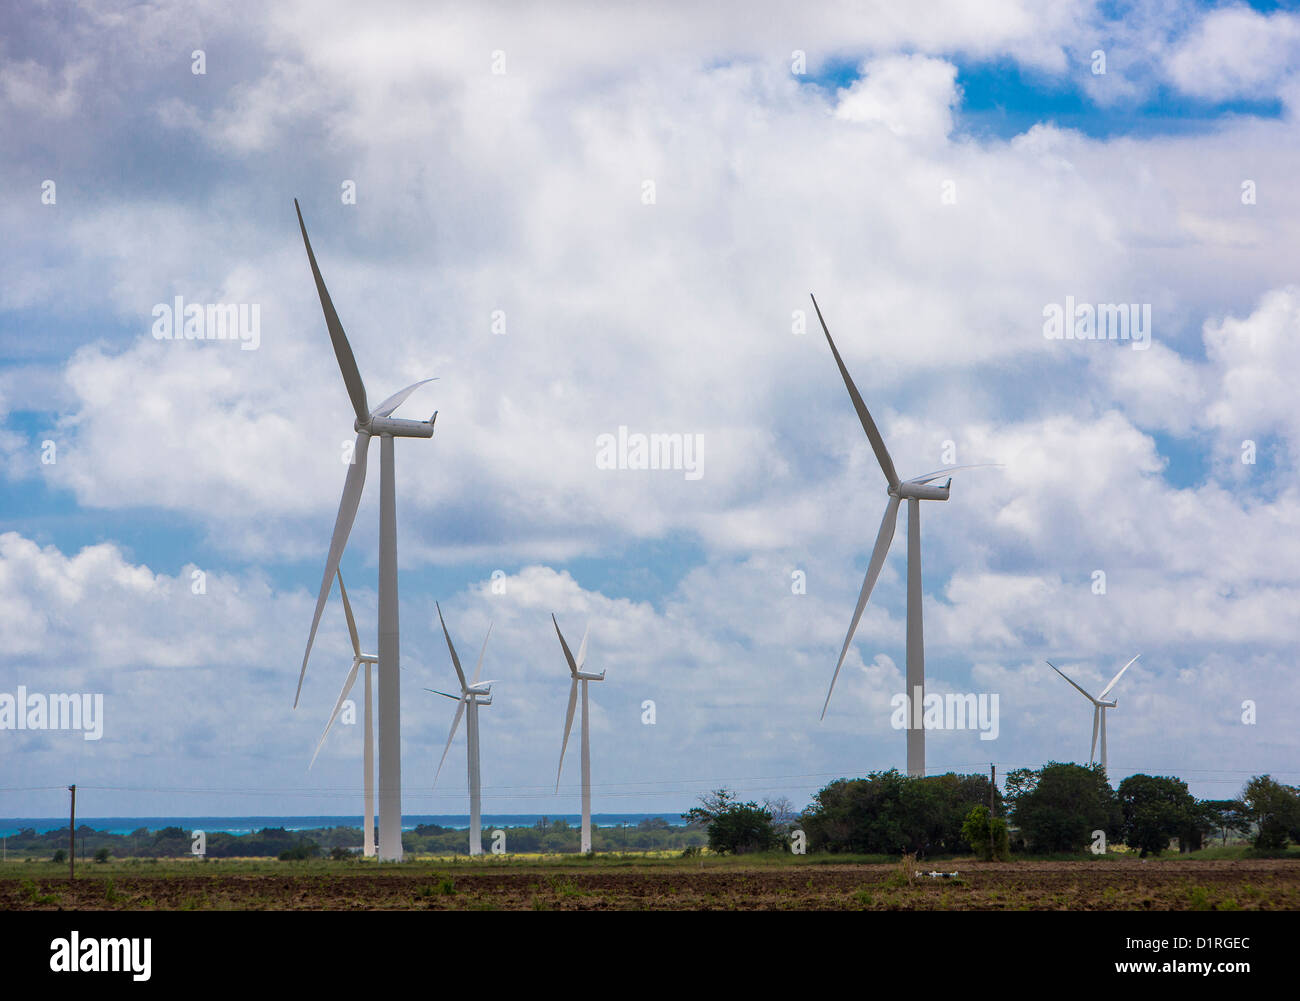 PONCE, PUERTO RICO - Windmills generating electricity from wind power, on southern coast near Santa Isabel east of Ponce. Stock Photo